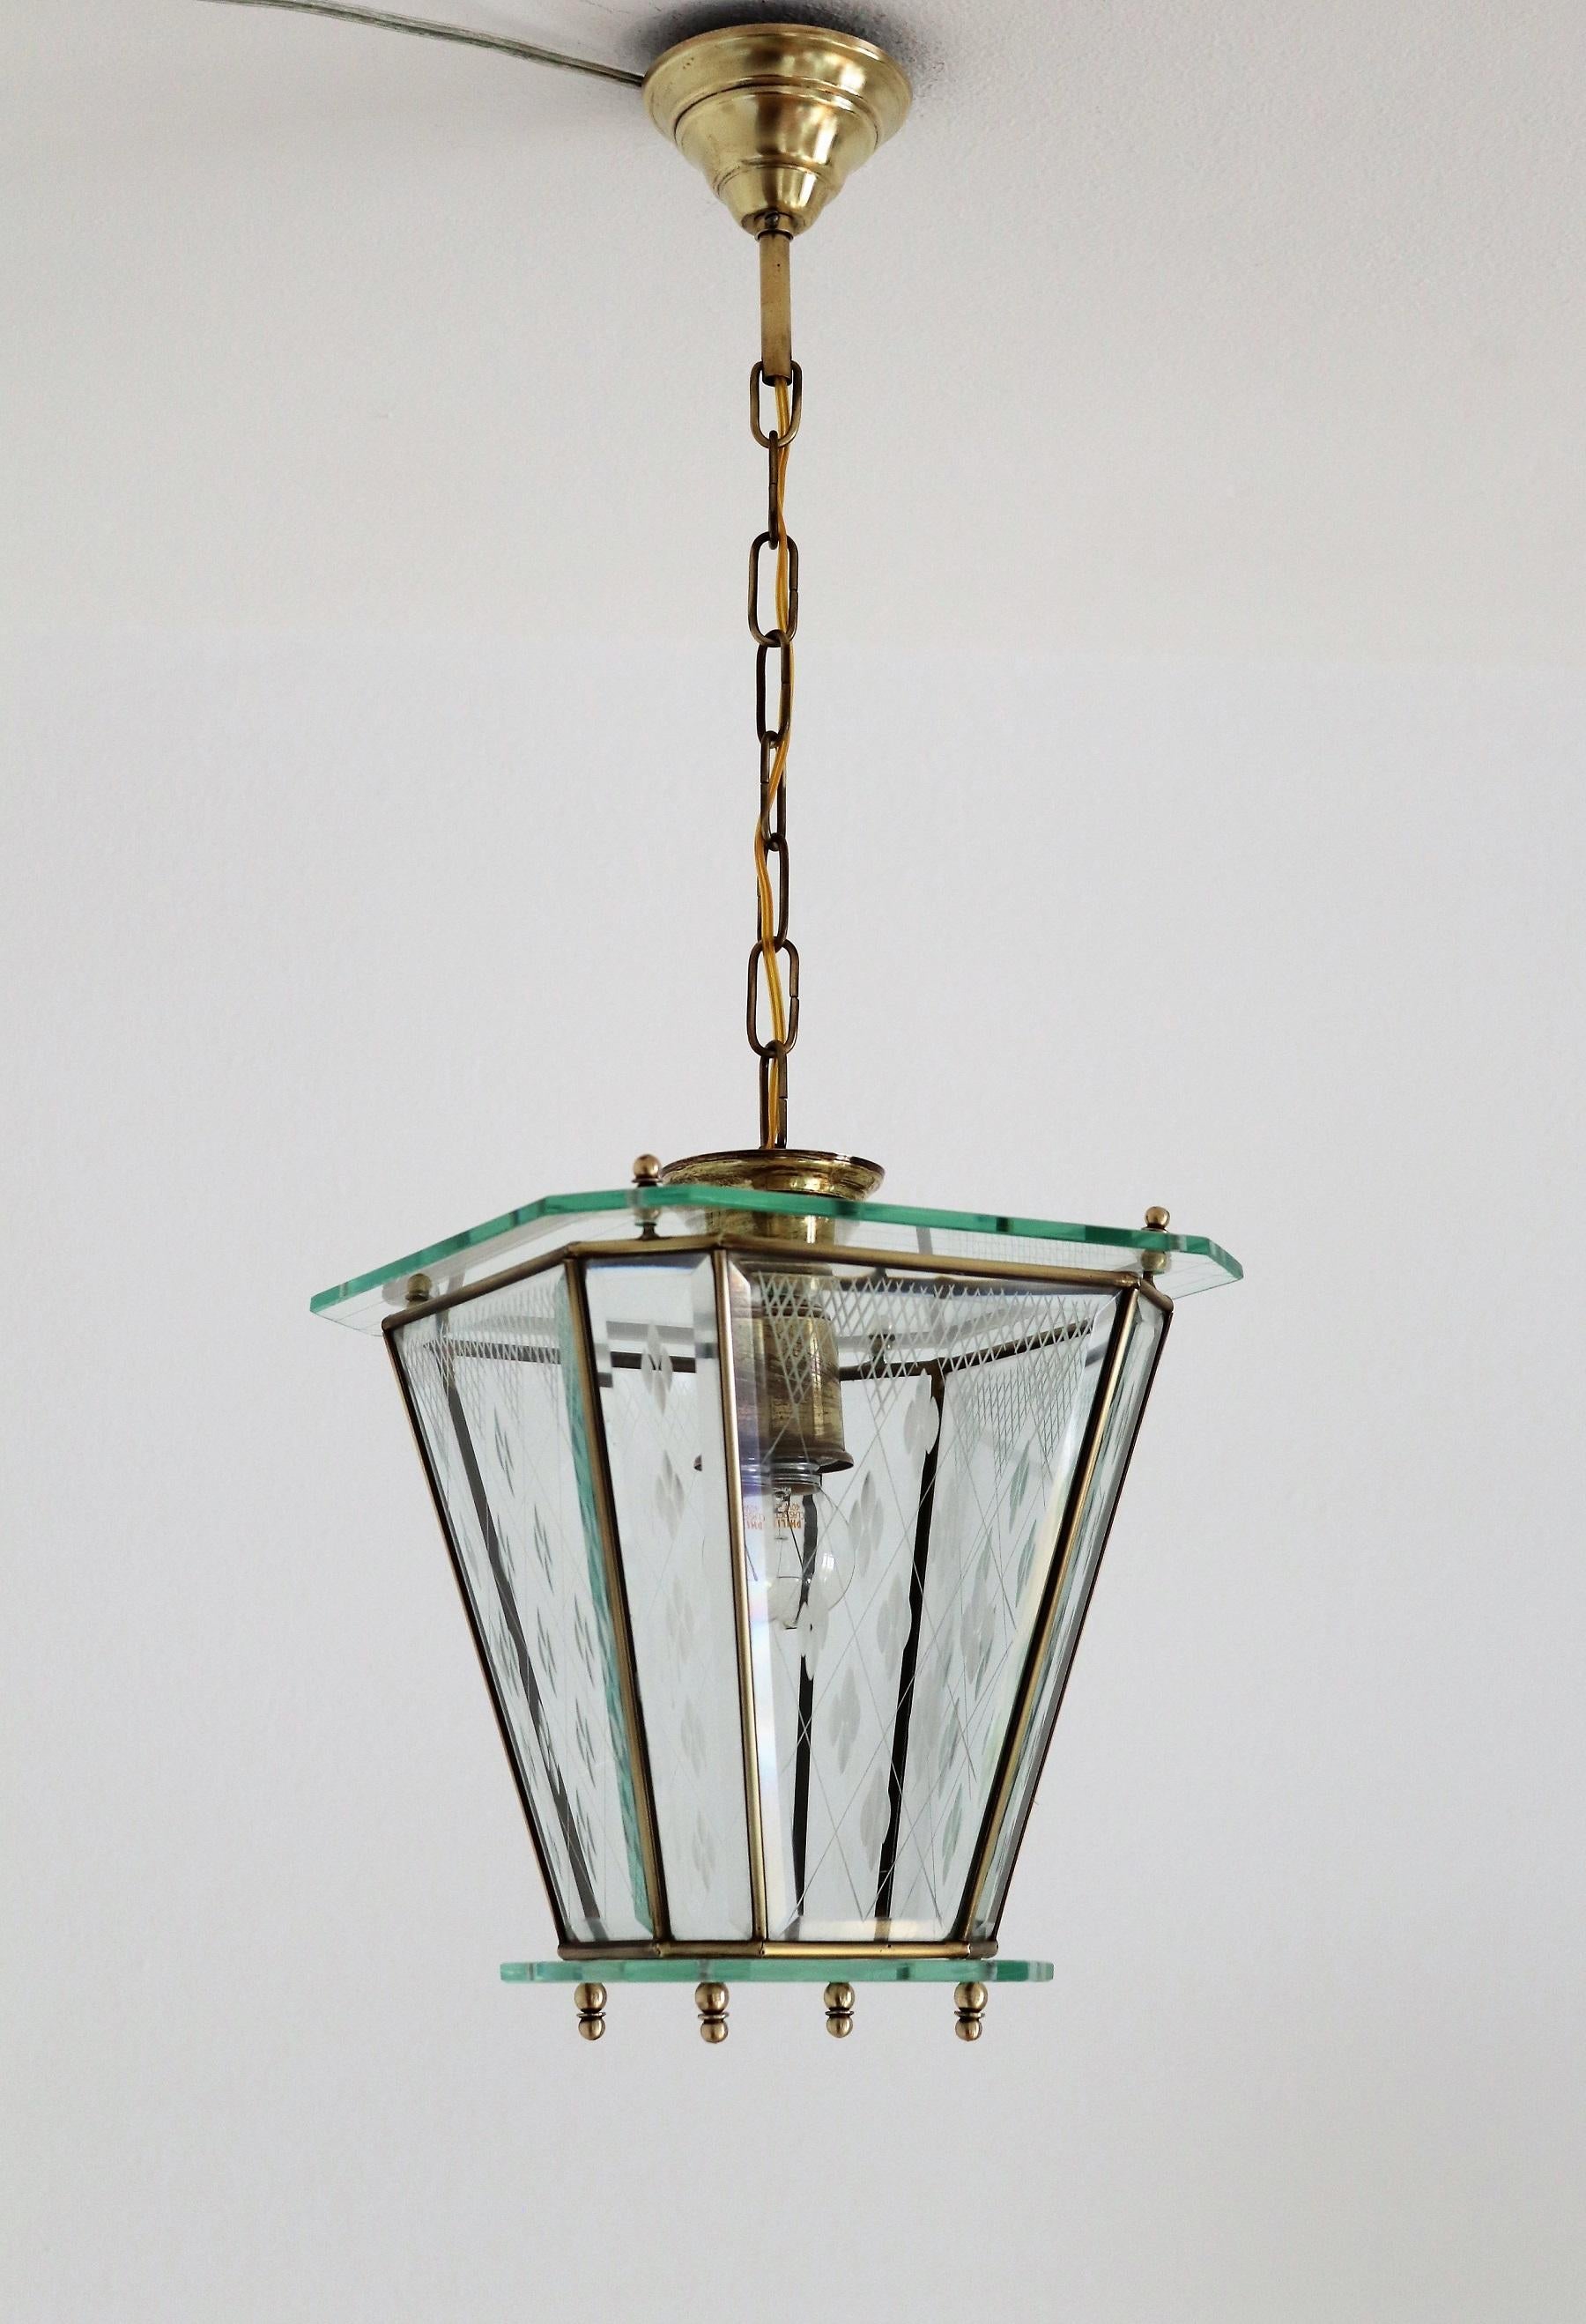 Mid-20th Century Italian Vintage Lantern in Crystal Cut Glass and Brass, 1950s For Sale